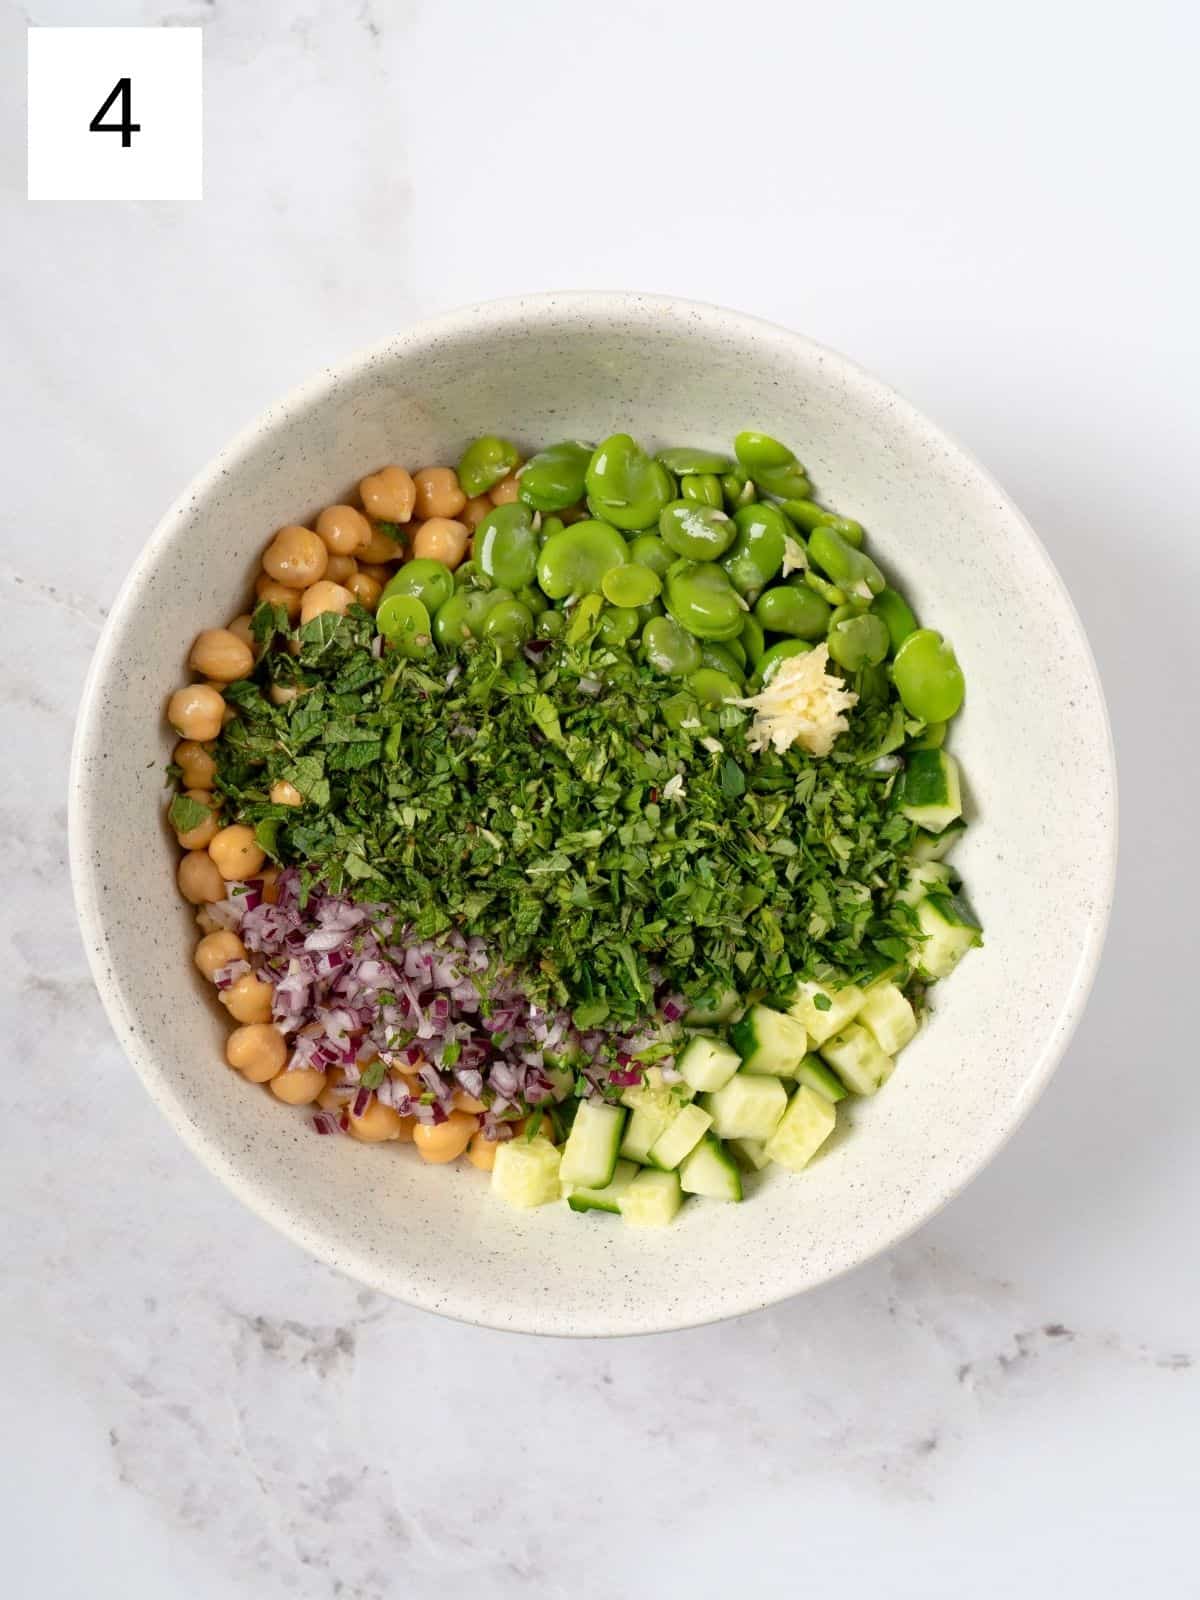 a mixture of chickpeas, fava beans, cucumber, herbs, and spices in a bowl.